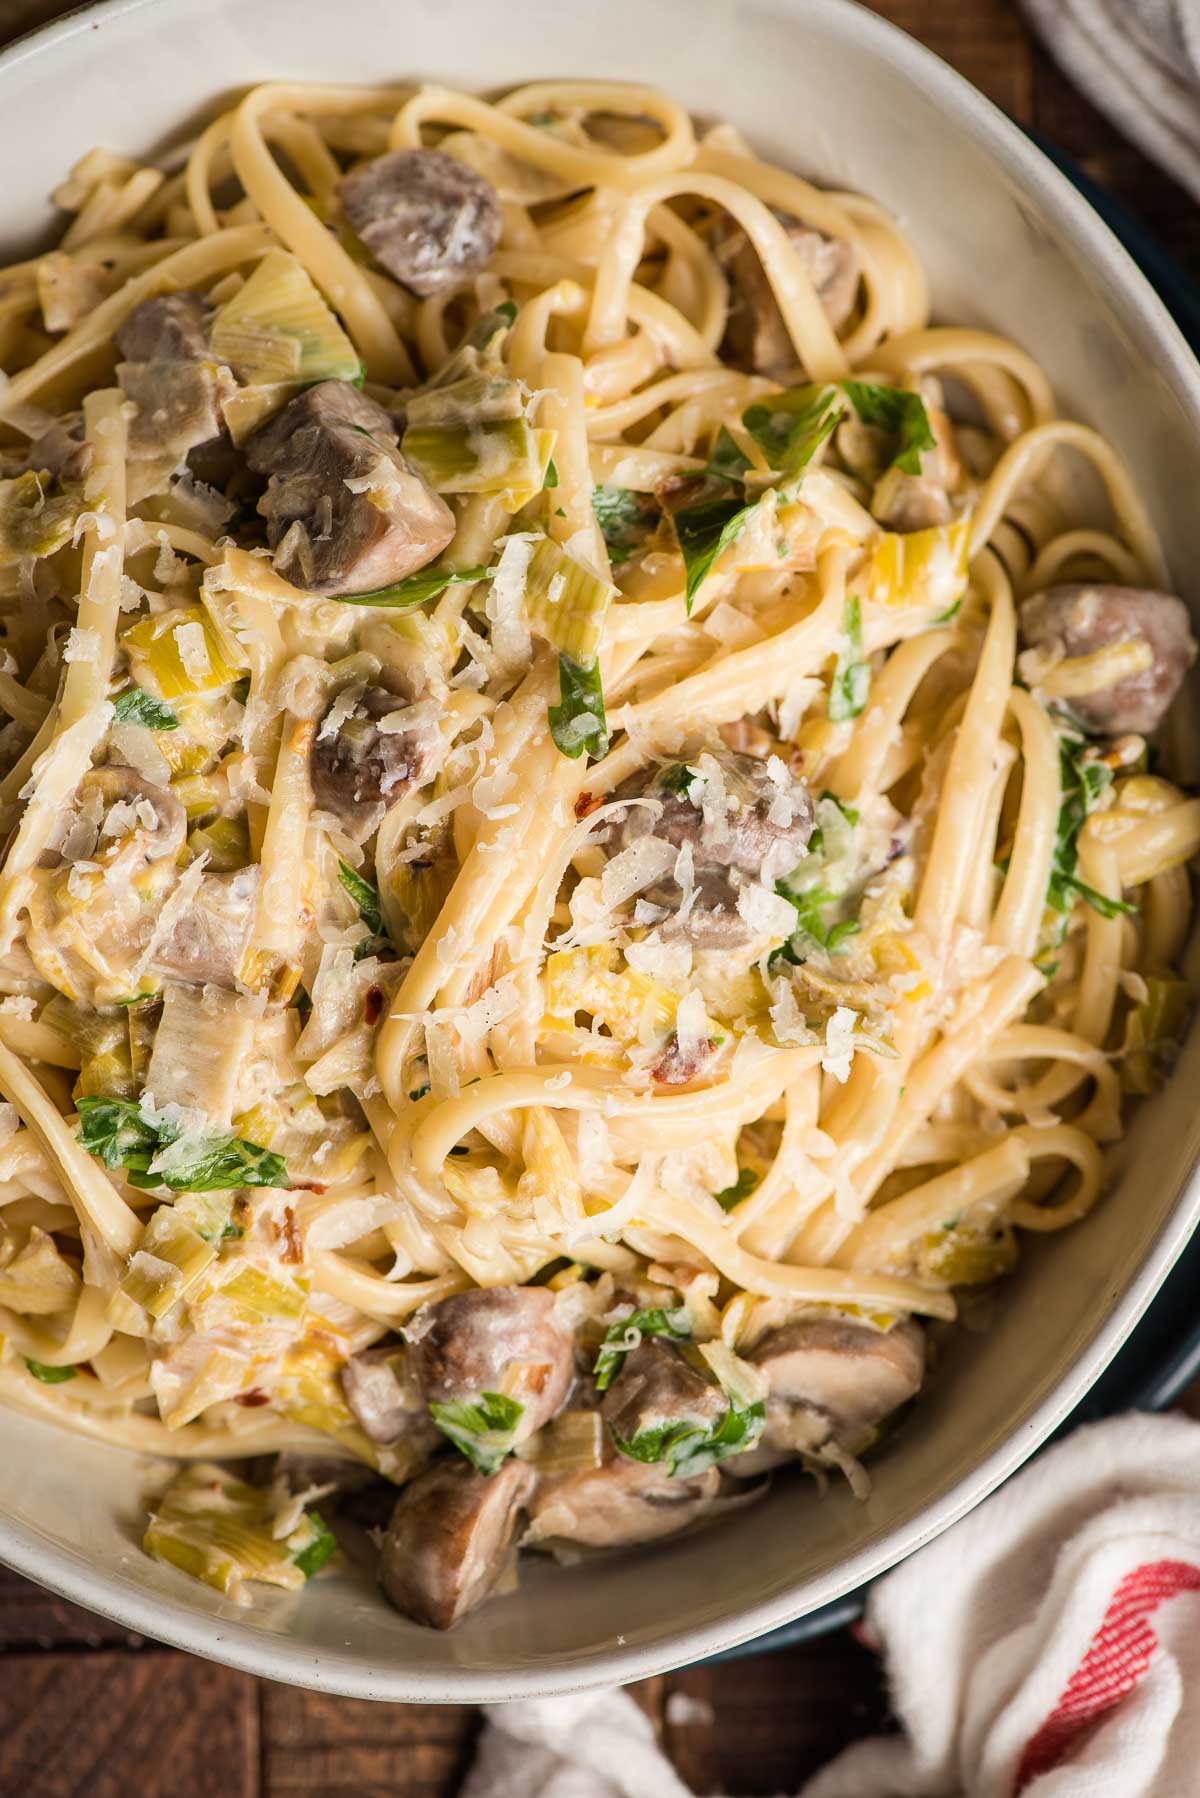 Creamy Mushroom and Leek Pasta in a white bowl.